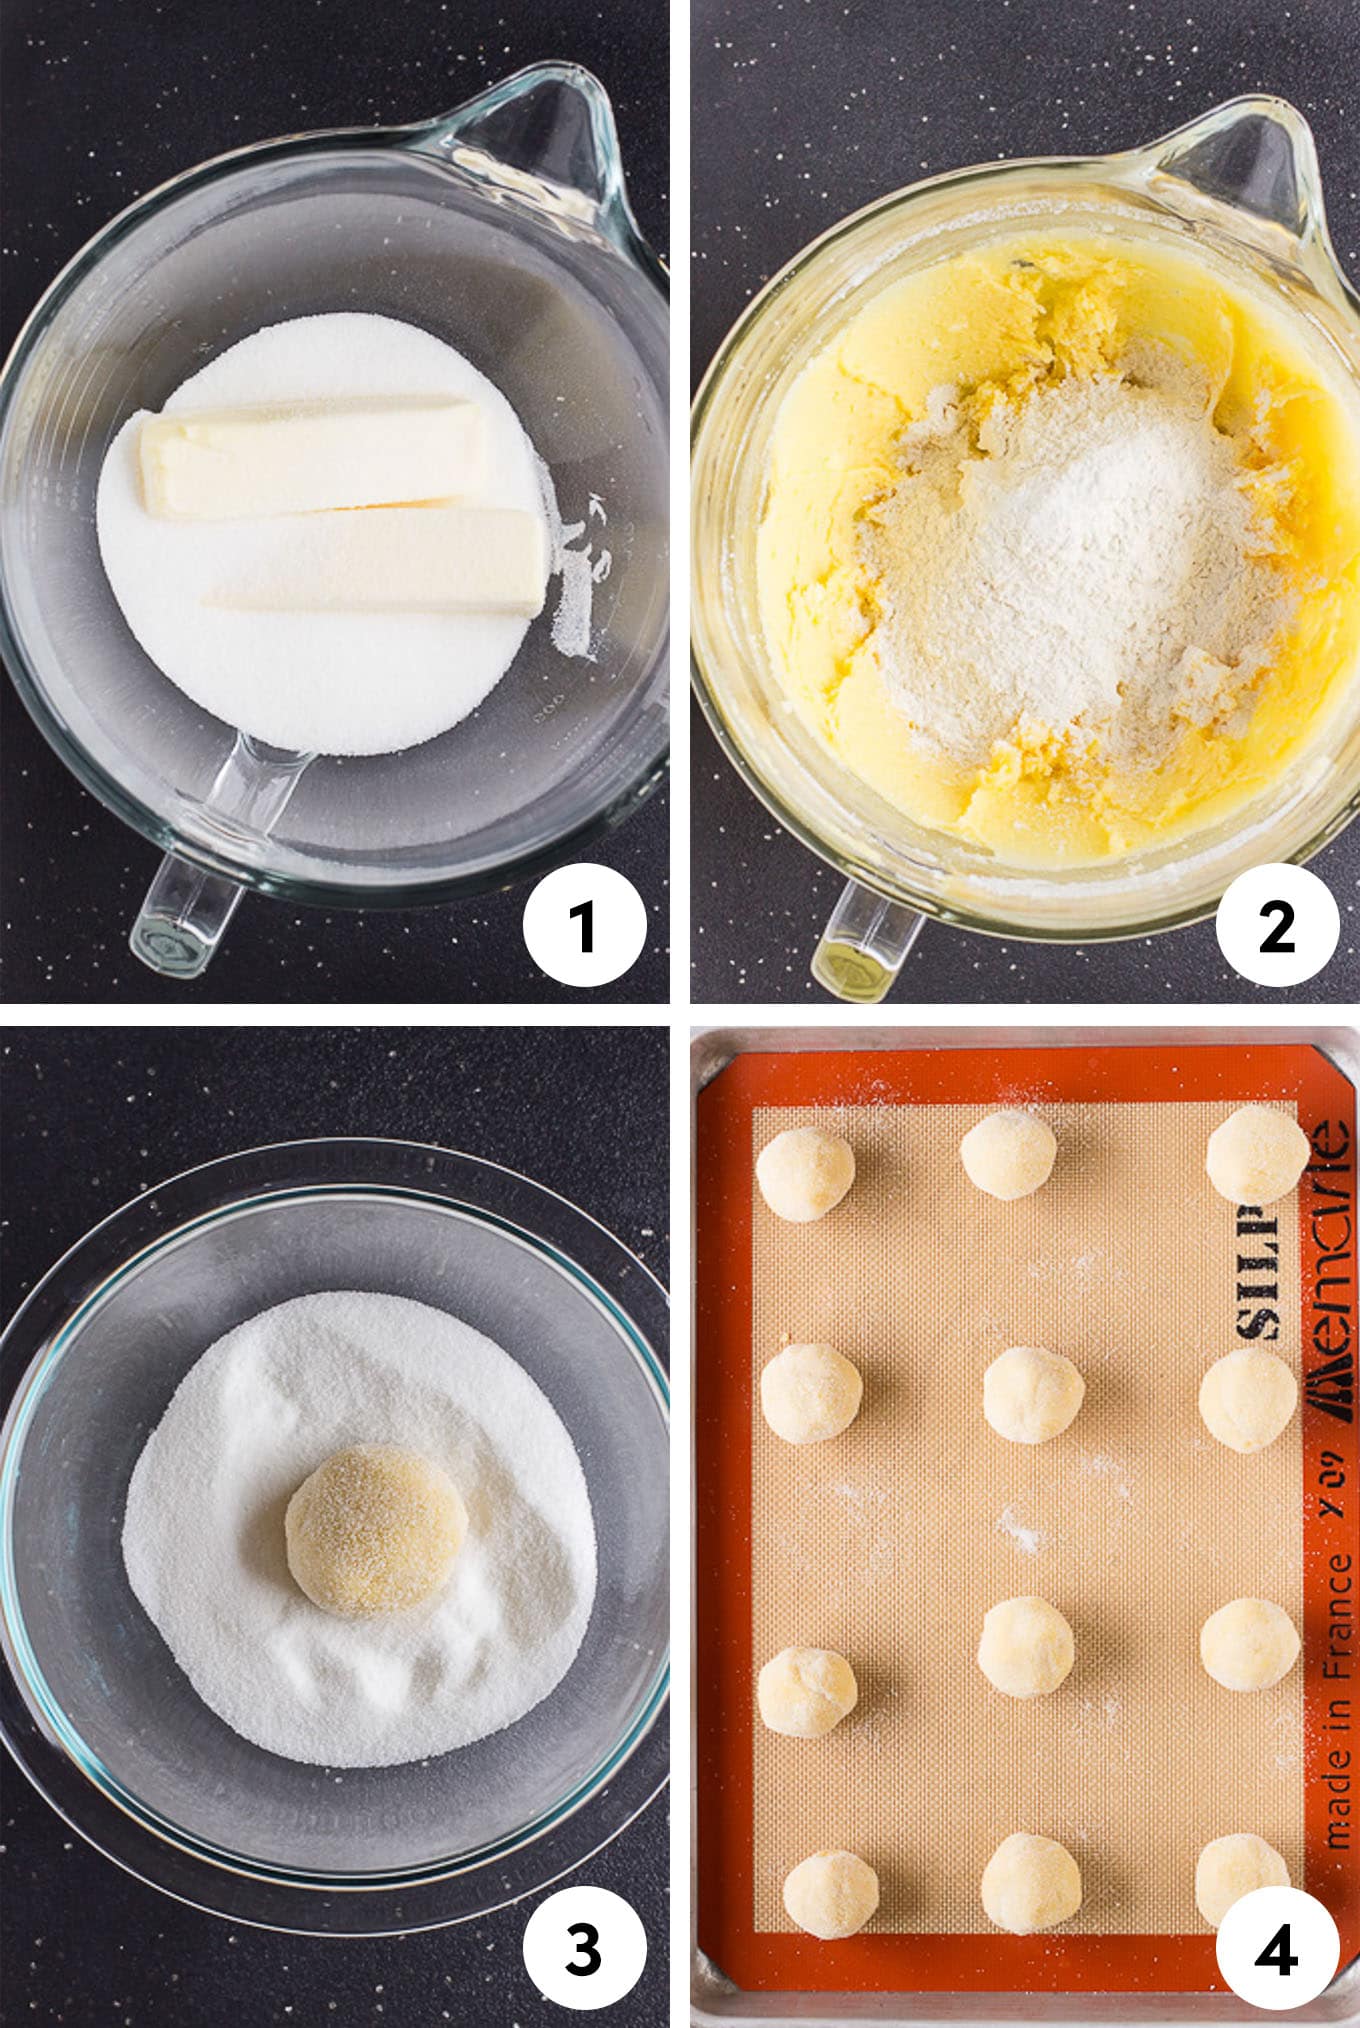 A collage of images showing mixing the butter and sugar then adding the rest of the ingredients before rolling into balls, dipping in sugar and putting the baking pan.